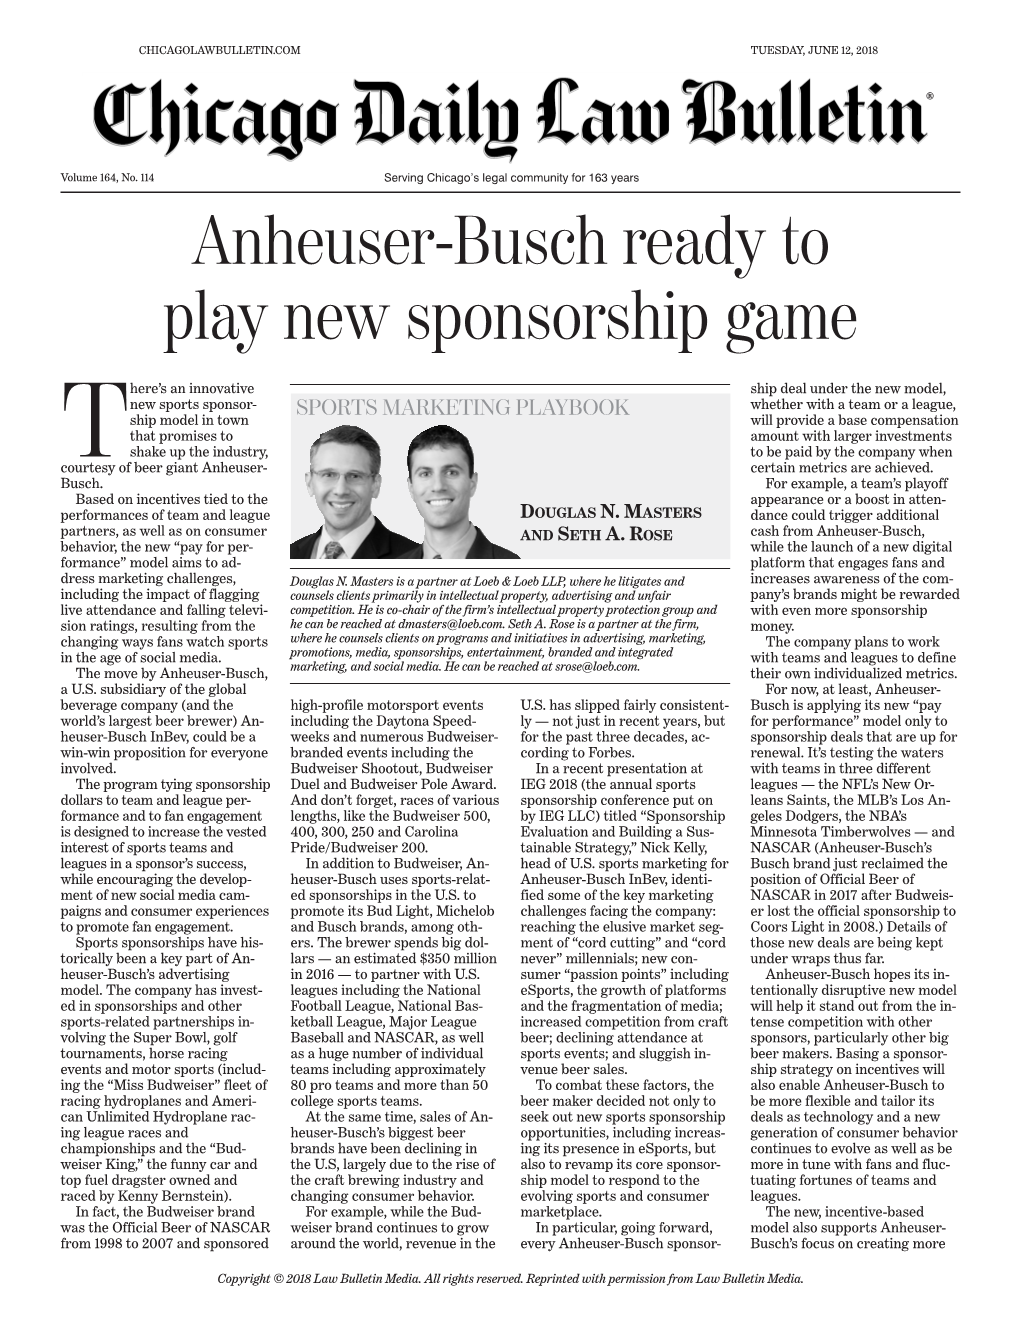 Anheuser-Busch Ready to Play New Sponsorship Game